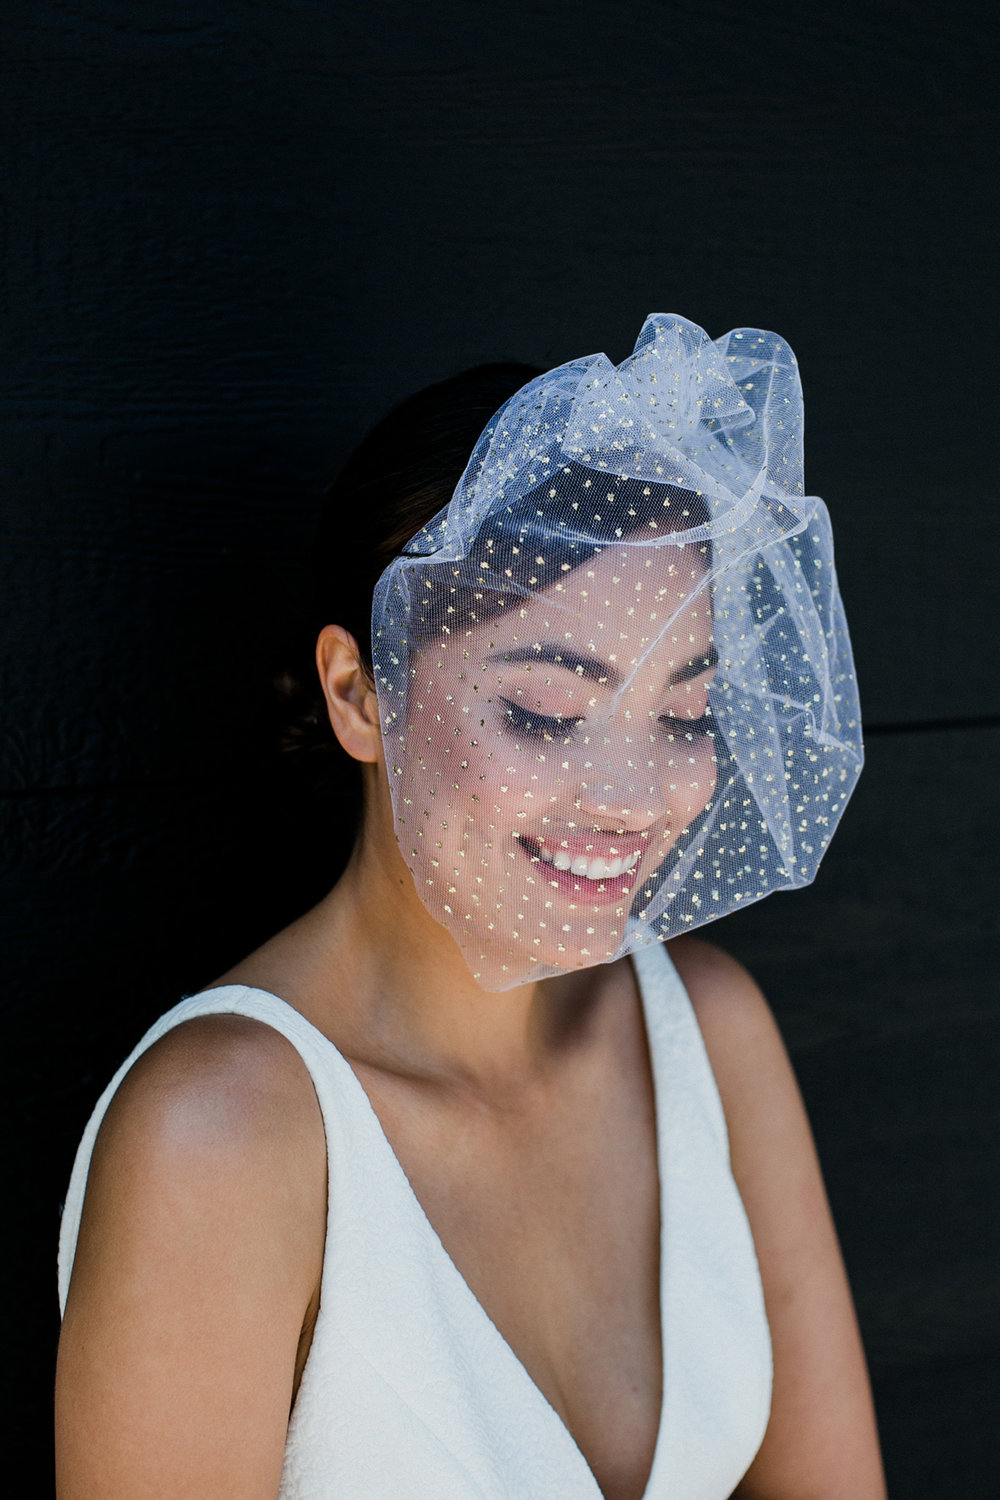 penny birdcage veil 4 hushed-commotion-fall-2018-amber-gress-0196-.jpg